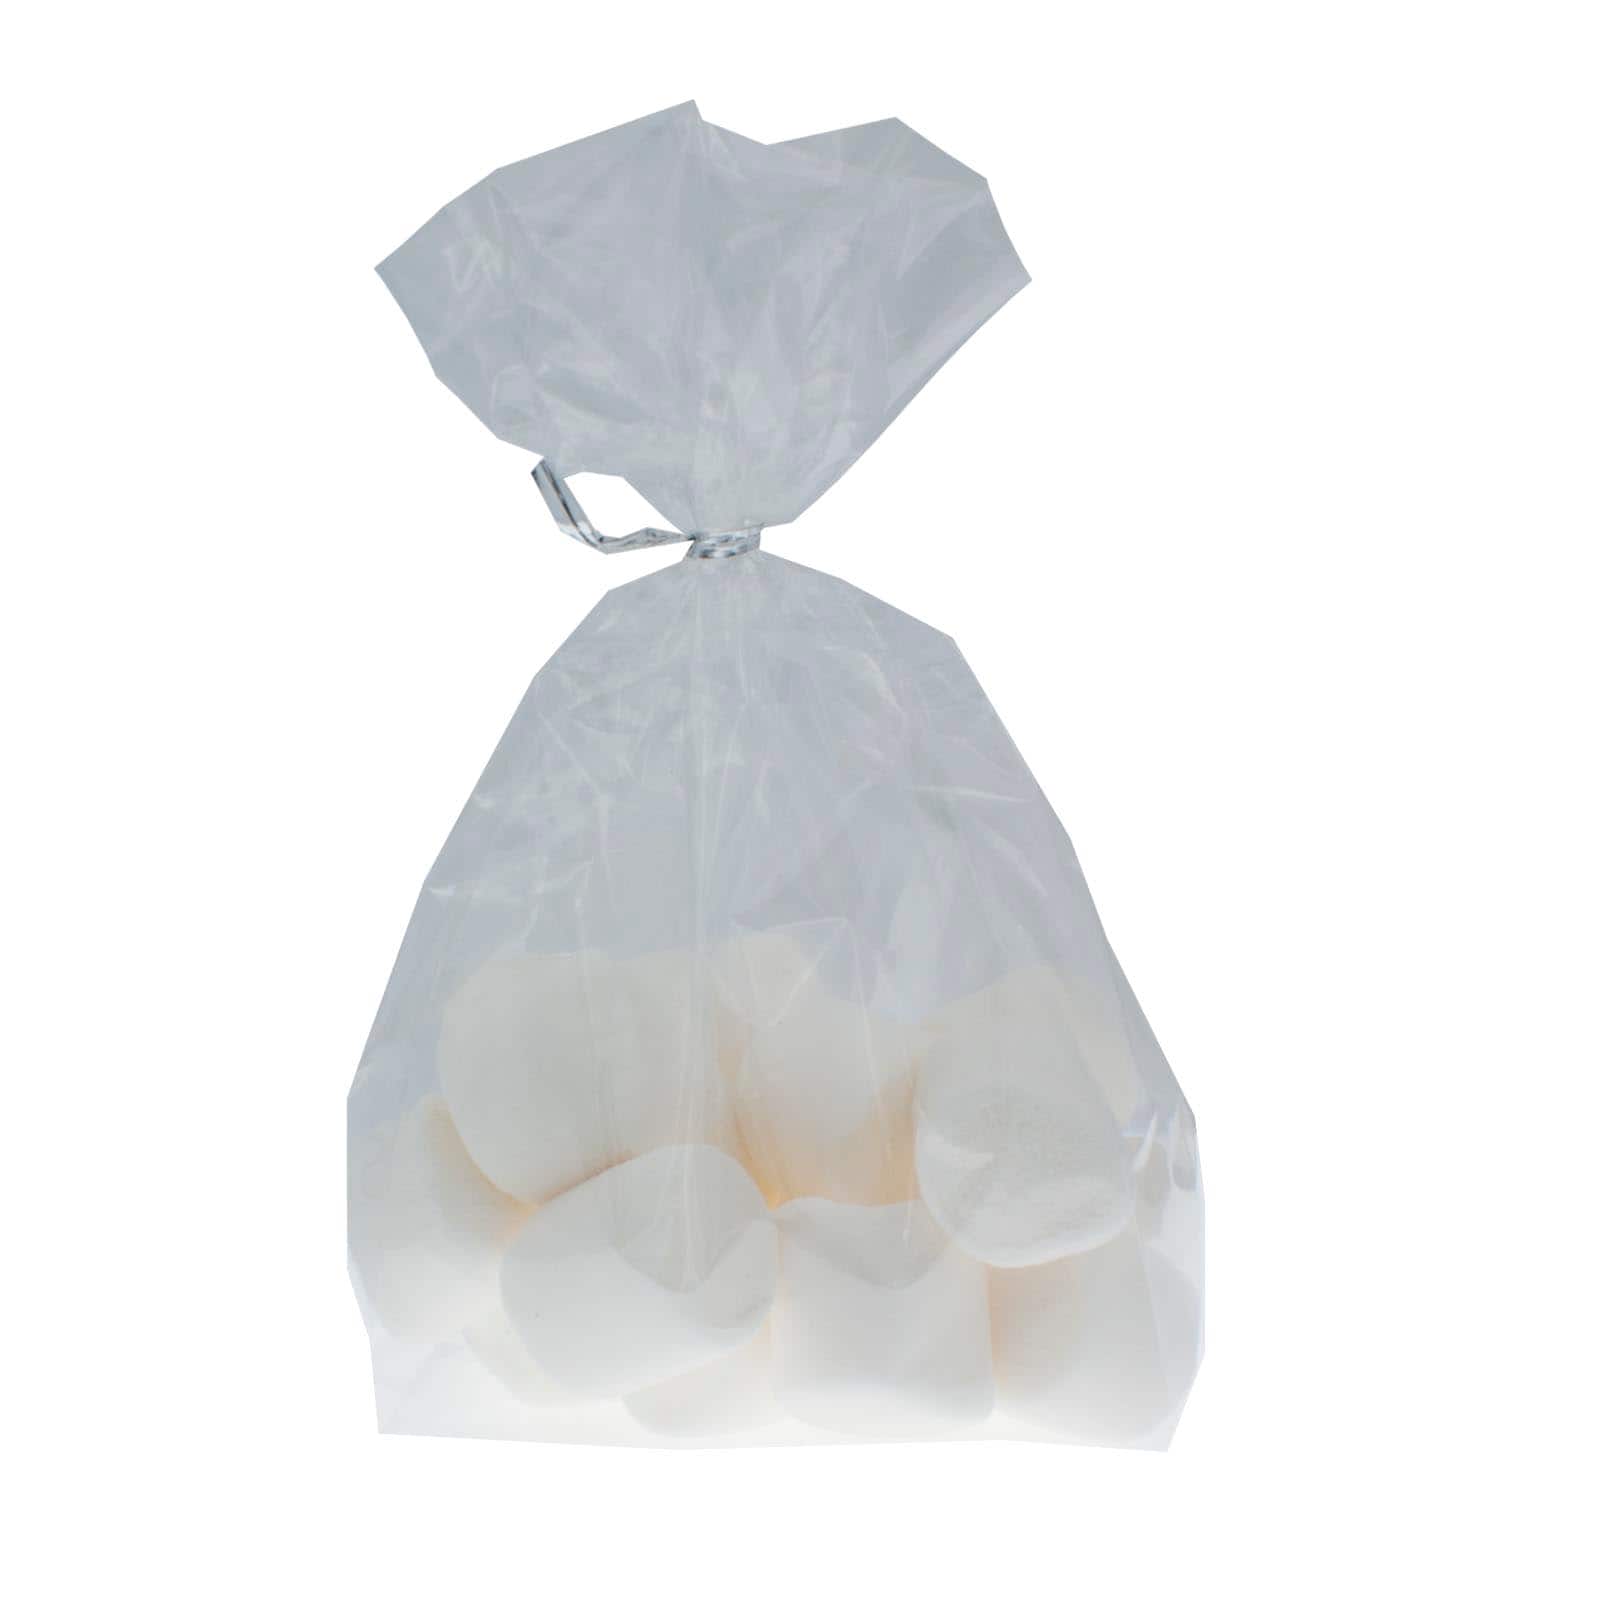 12 Packs: 20 ct. (240 total) Clear Treat Bags by Celebrate It™